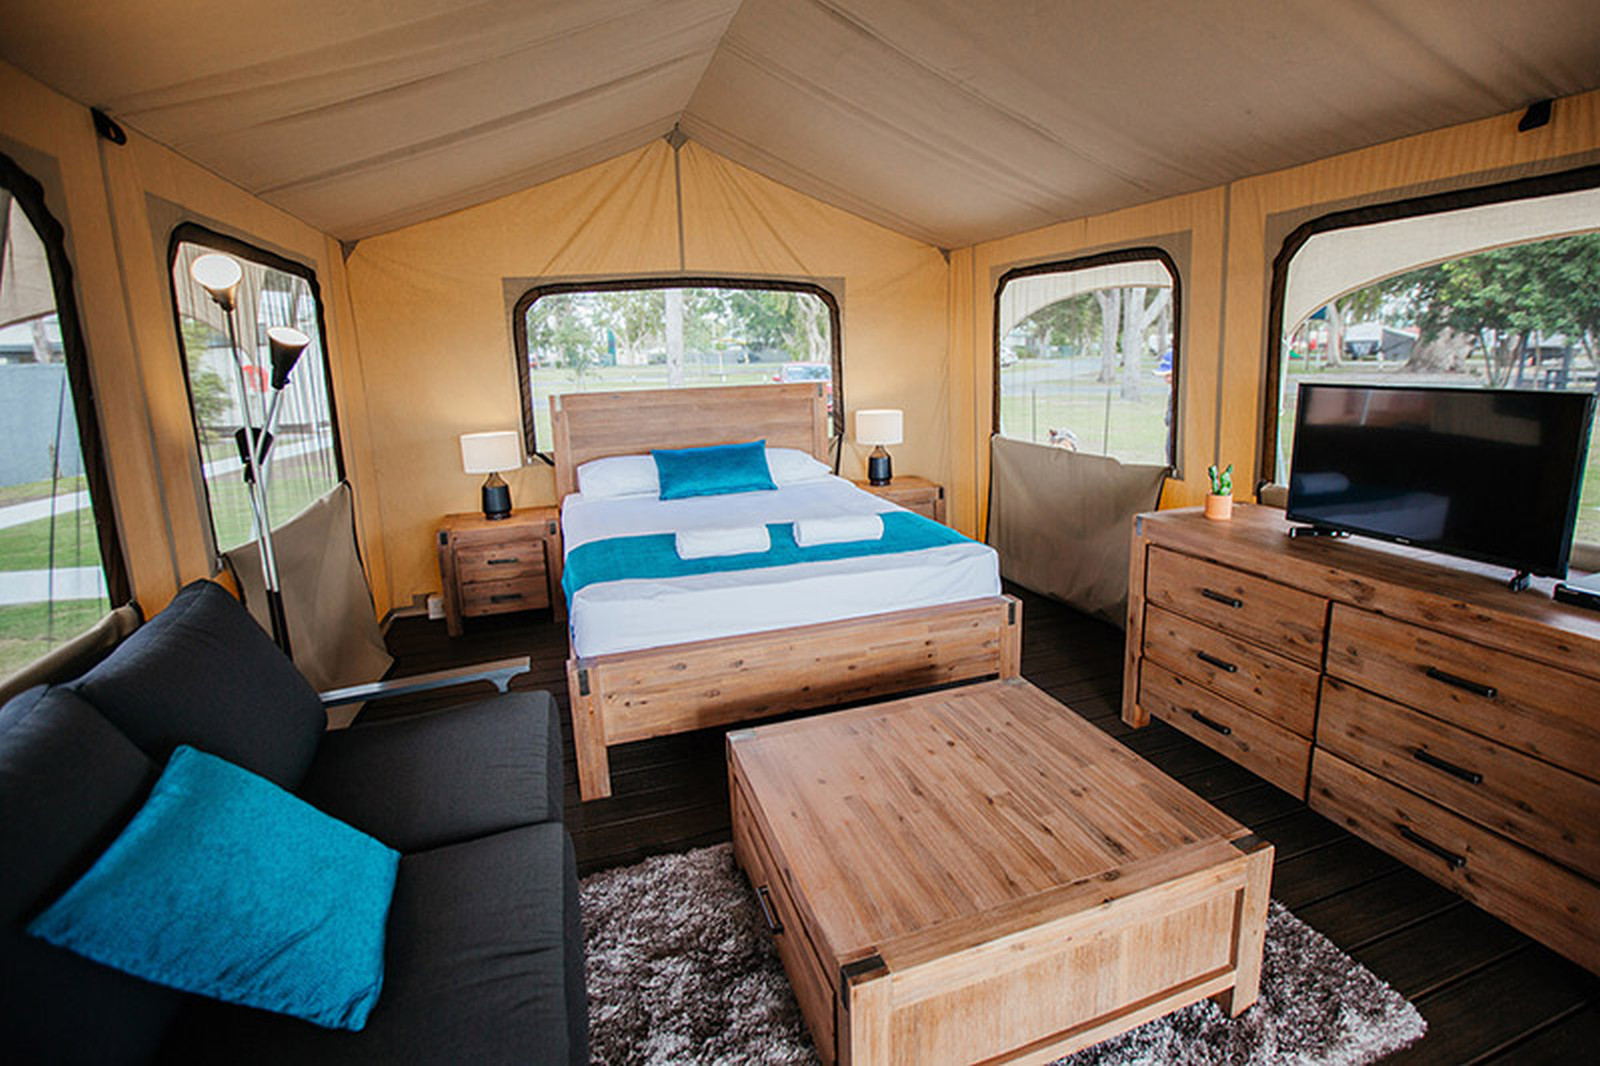 Luxury Glamping Tents for Sale